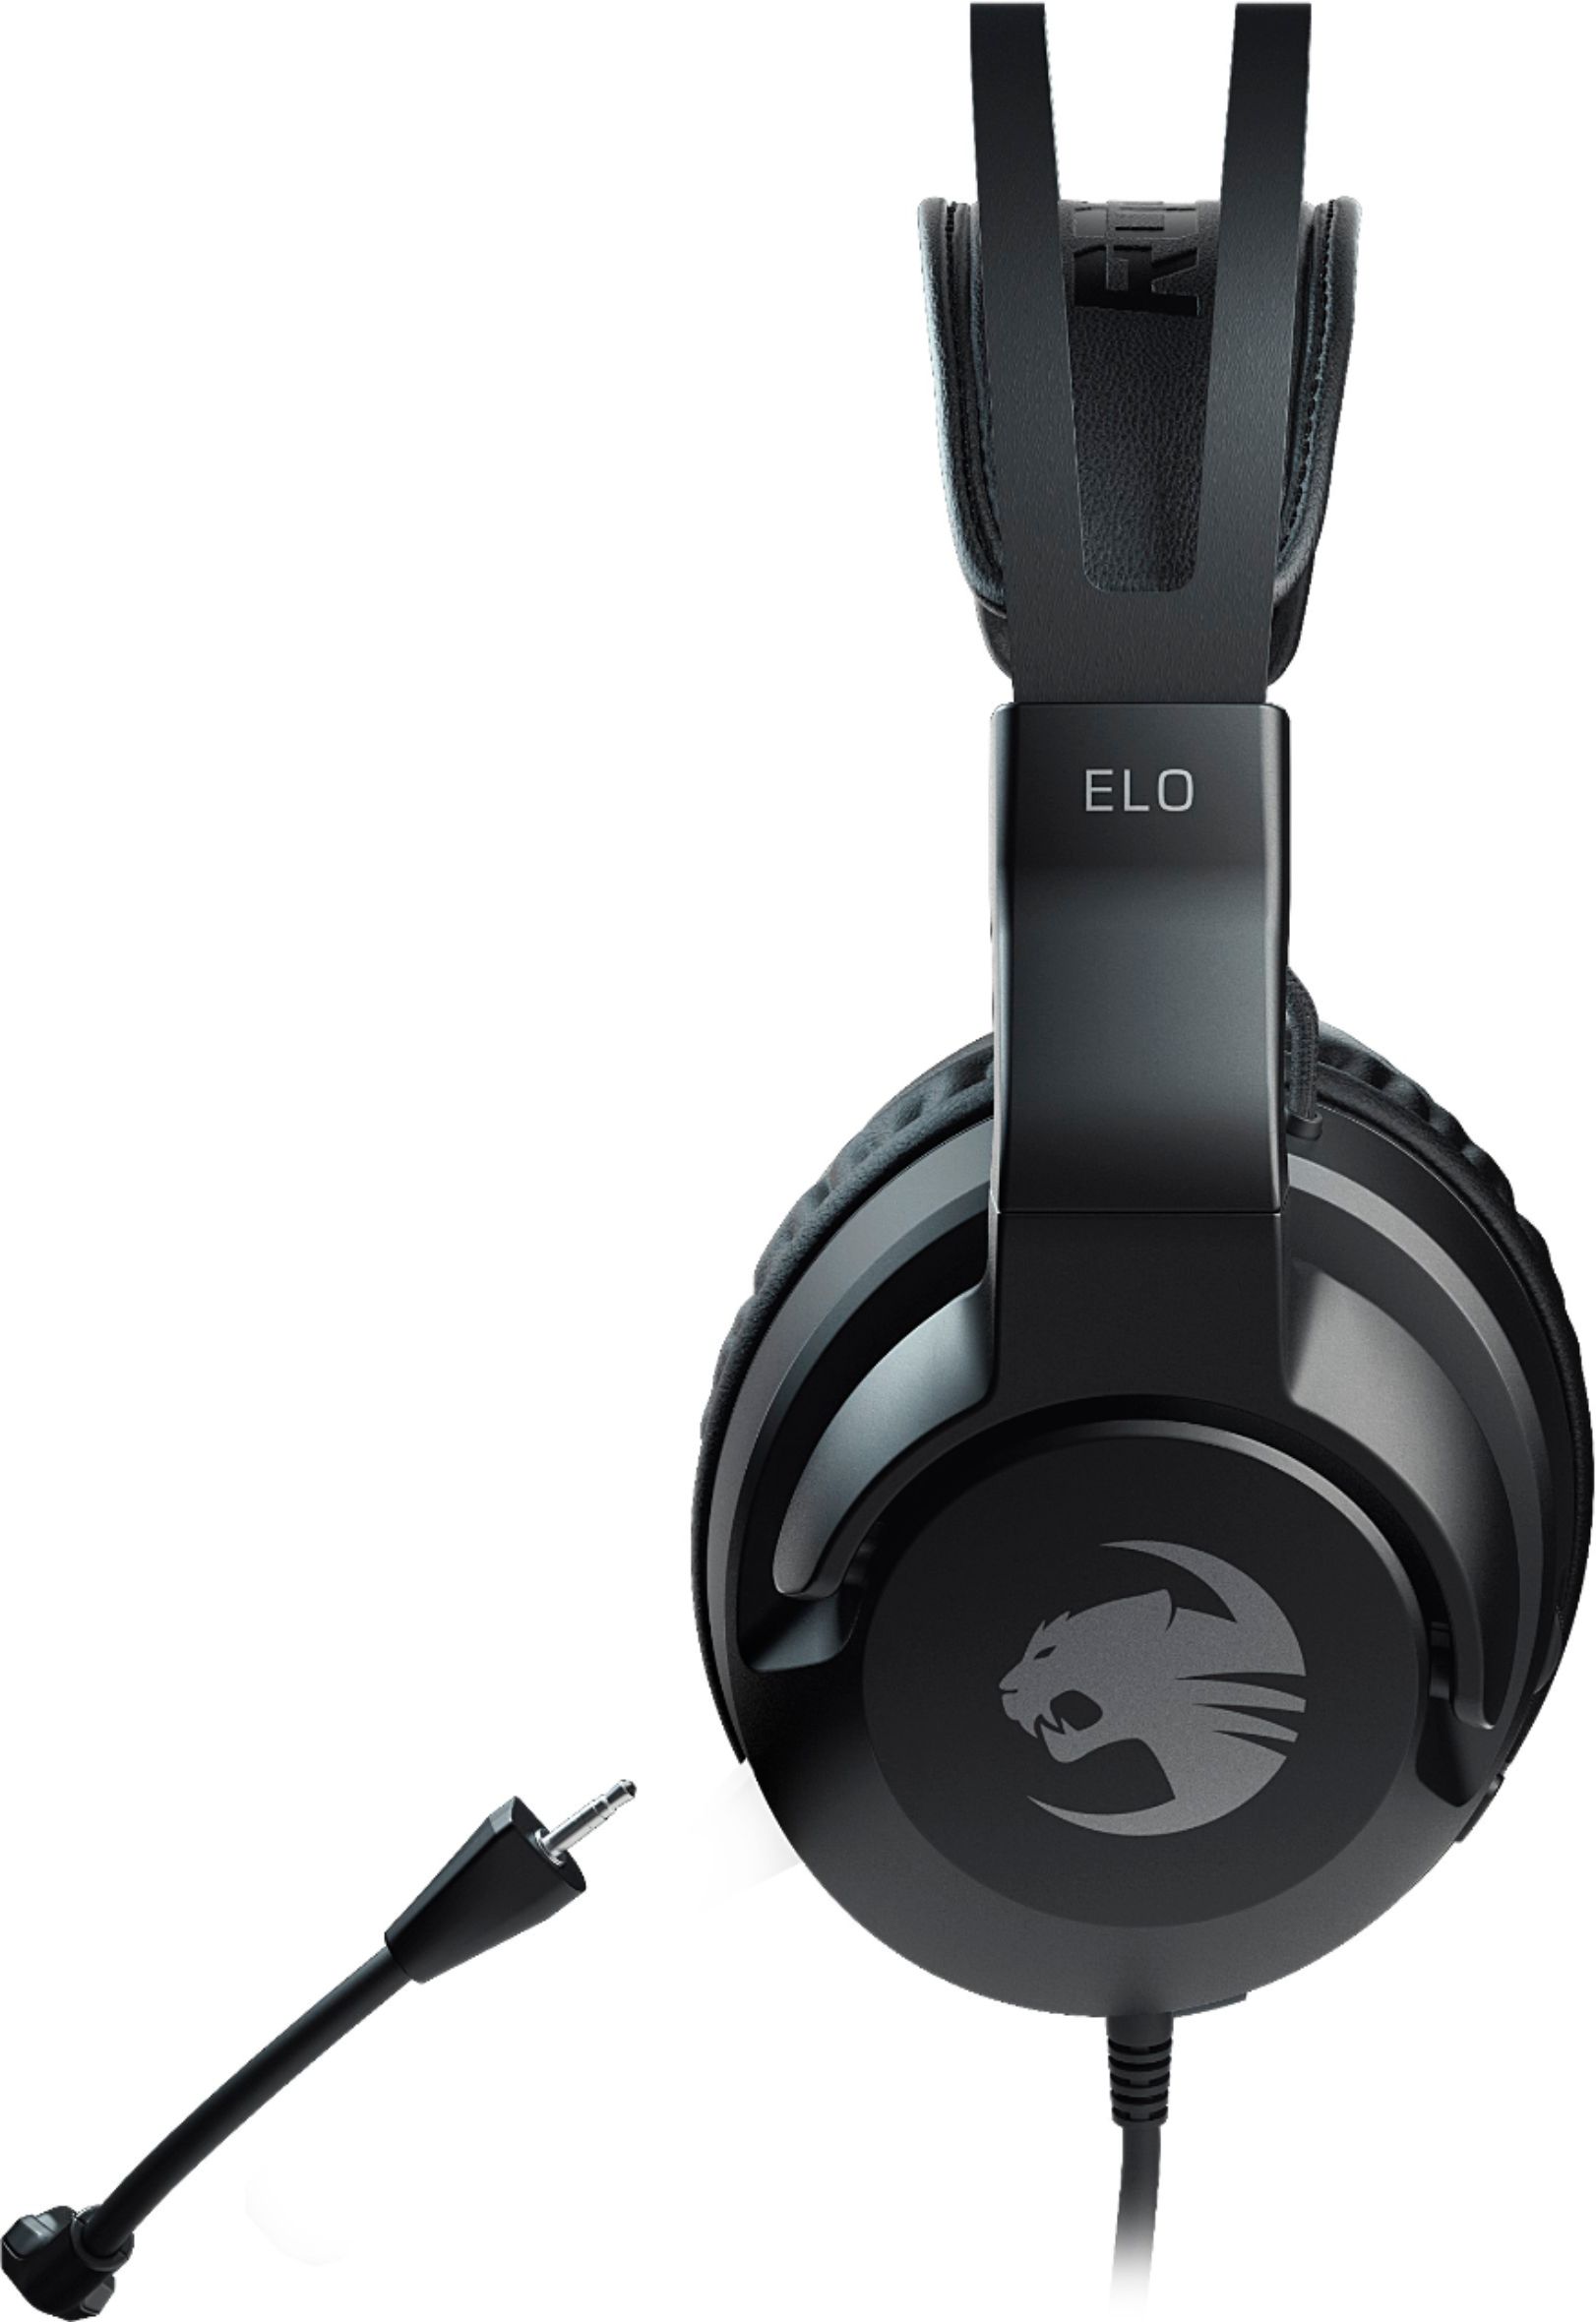 Casque gaming multiplateforme Turtle Beach® Recon 50 pour Nintendo Switch™1, Xbox Series X, Xbox Series S & Xbox One, PS5™, PS4™, PS4™ Pro